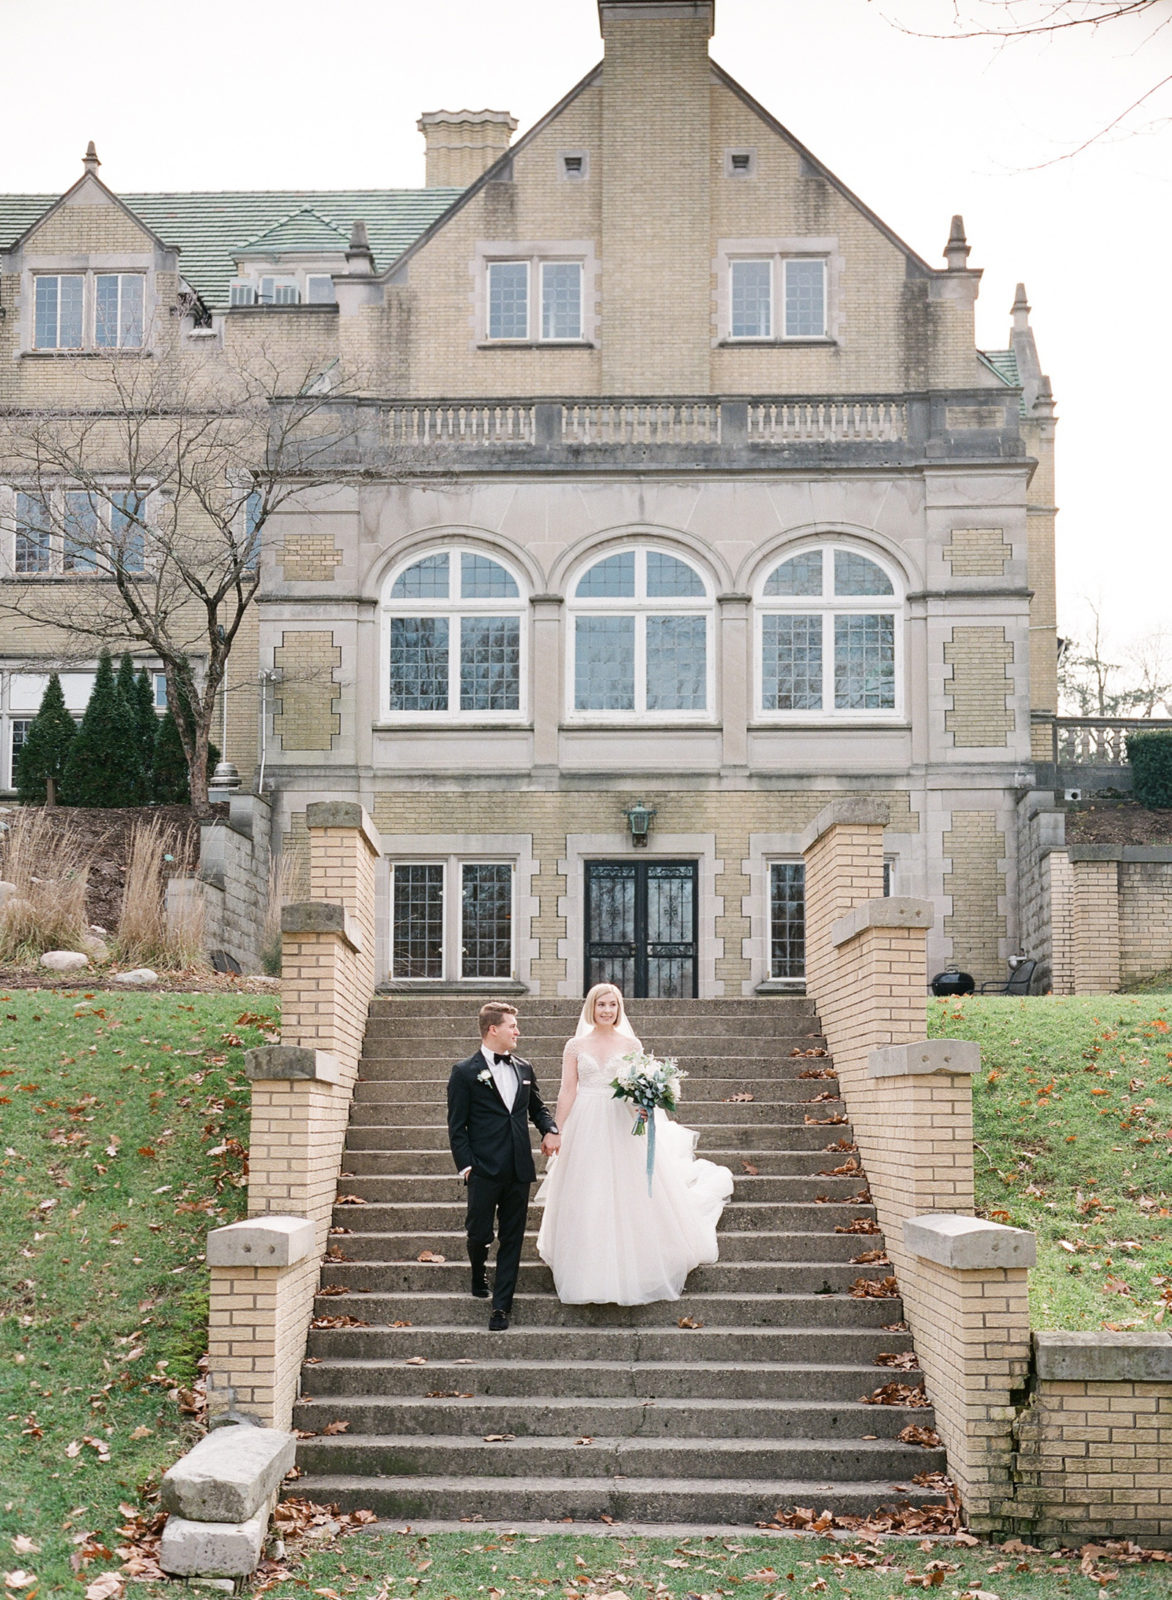 Laurel Hall Wedding Photographer | Estate Wedding Venue | Midwest Film Photographer | Molly Carr Photography | Bride and Groom